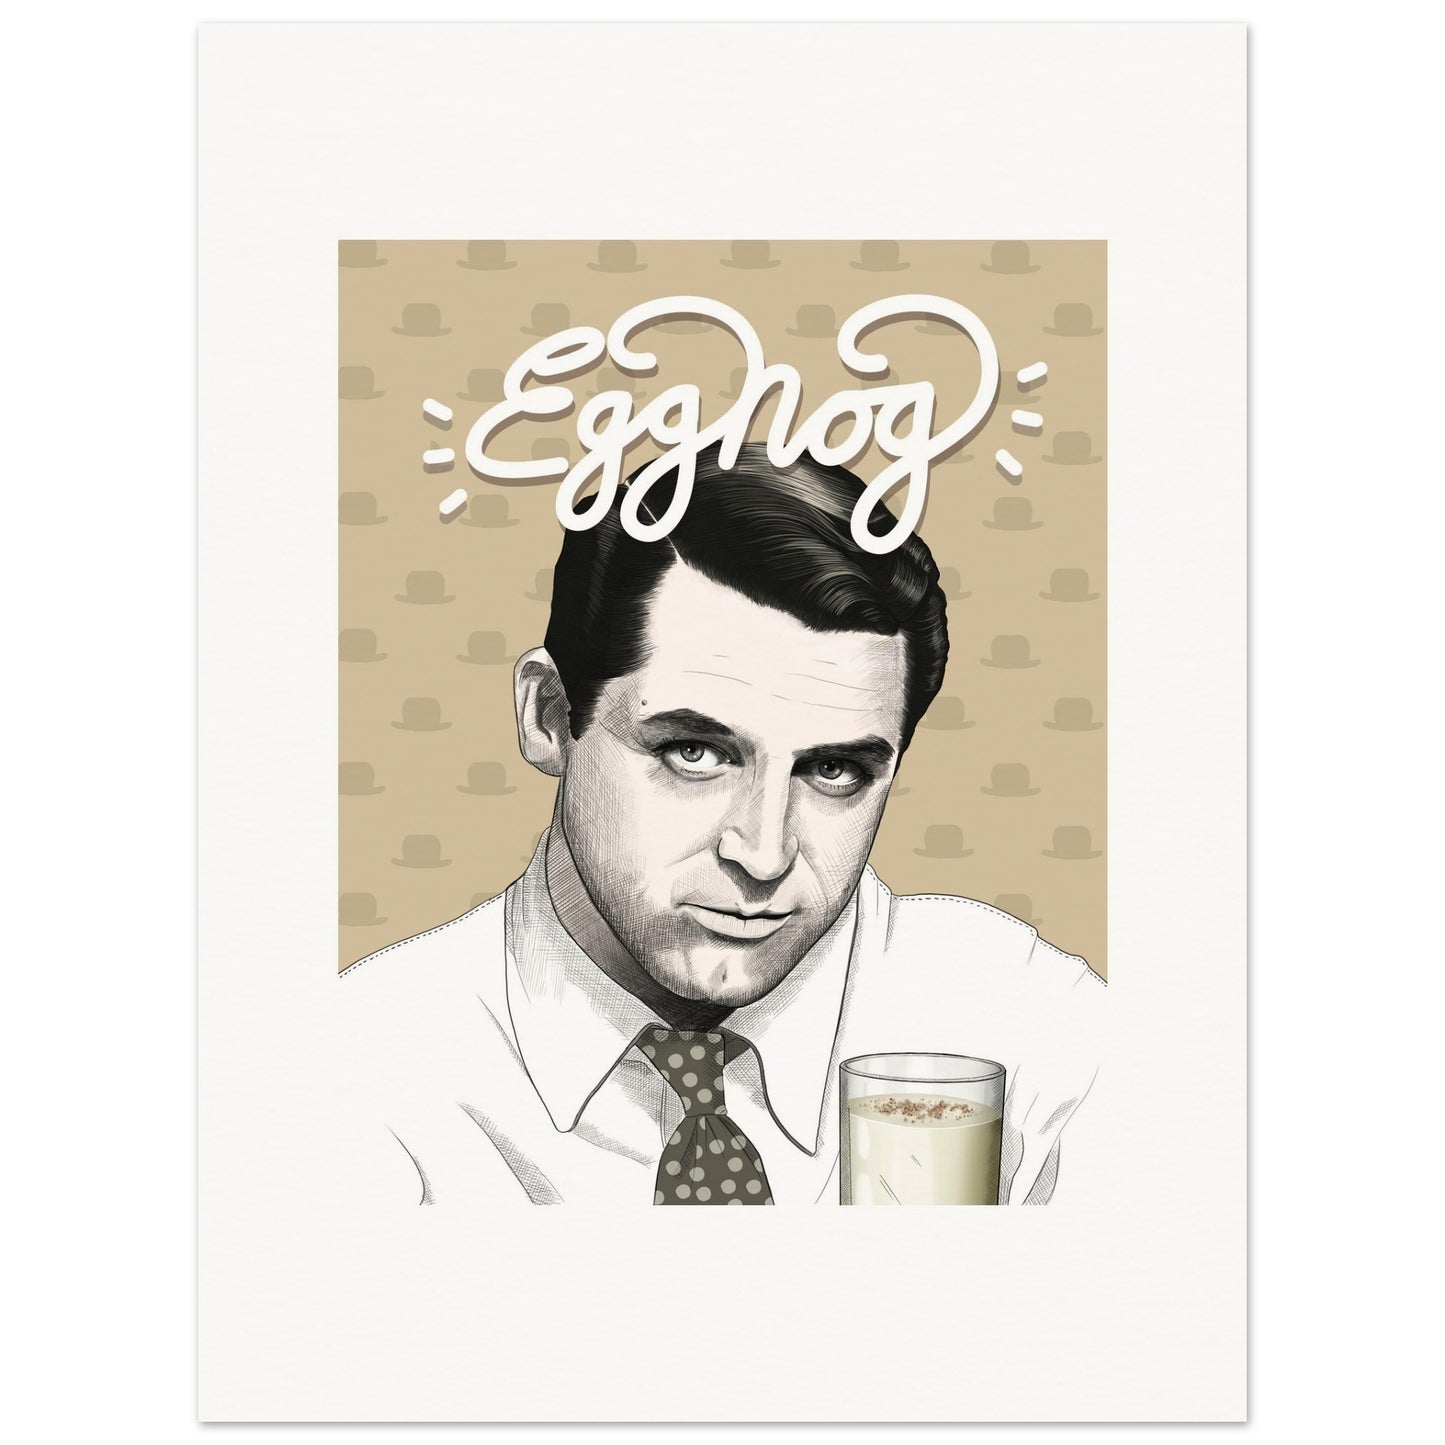 Egg Nog | Cary Grant | The Awful Truth - Poster Print